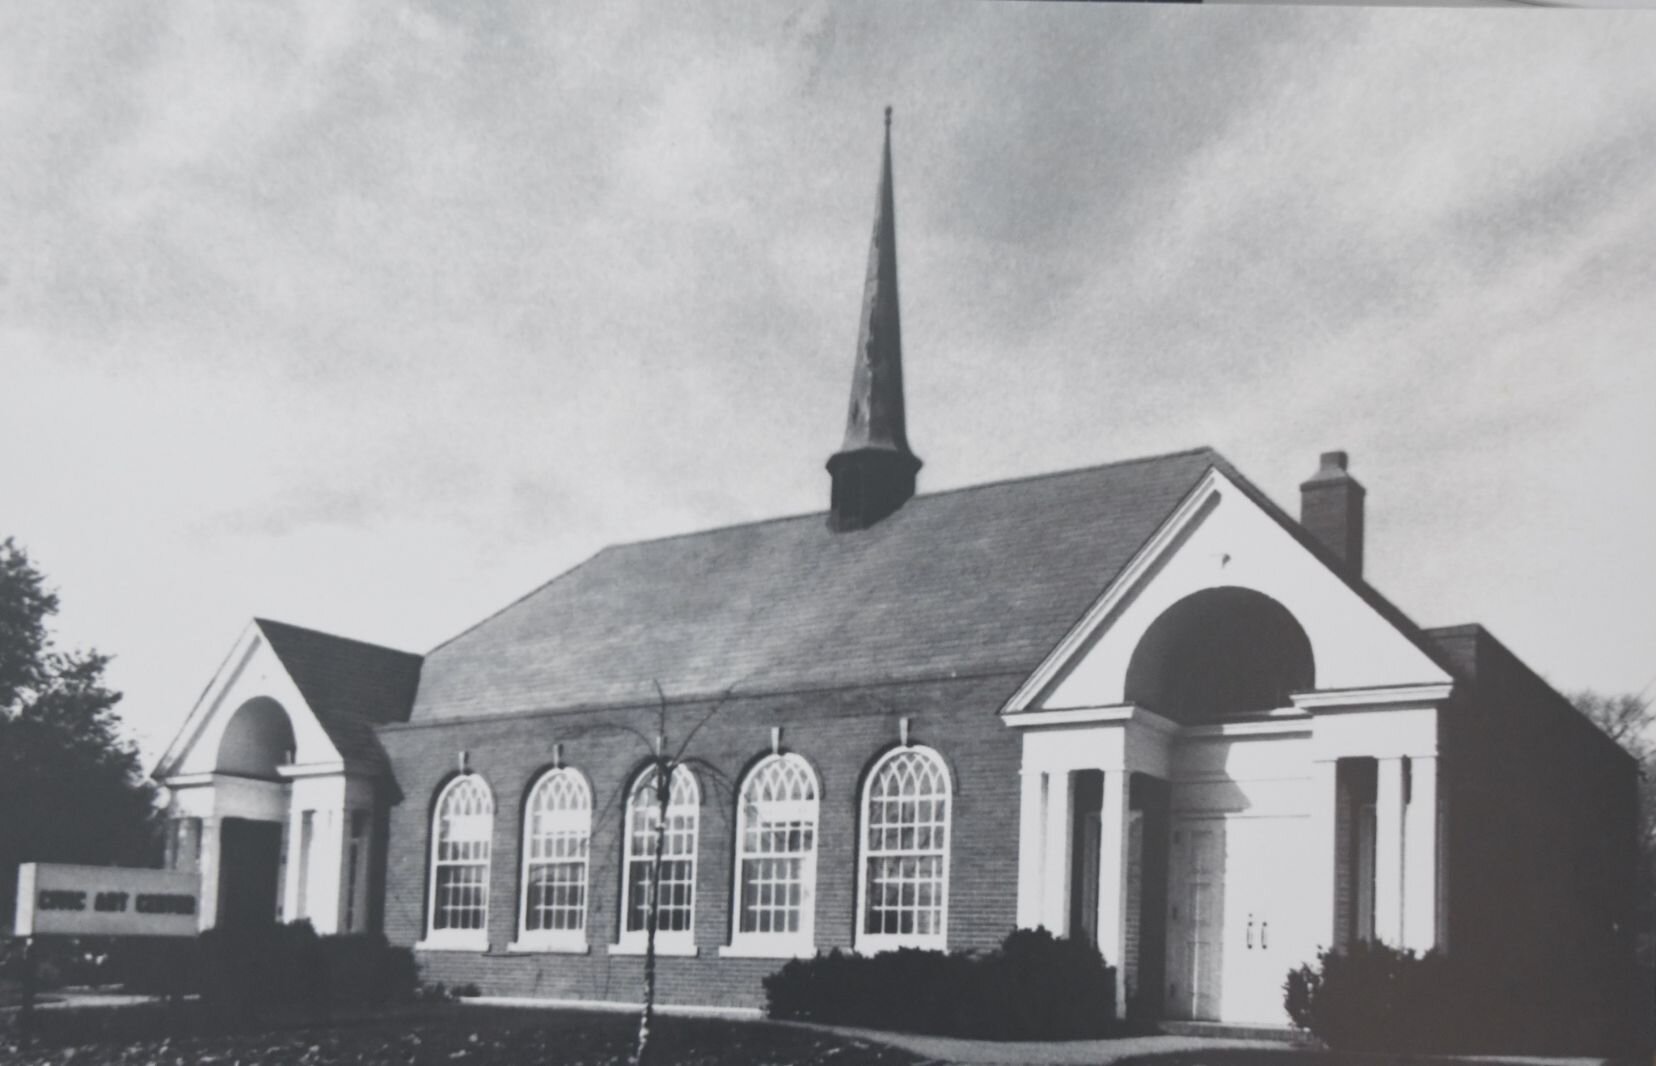 The building where the Art Center of Battle Creek is located was originally a church.